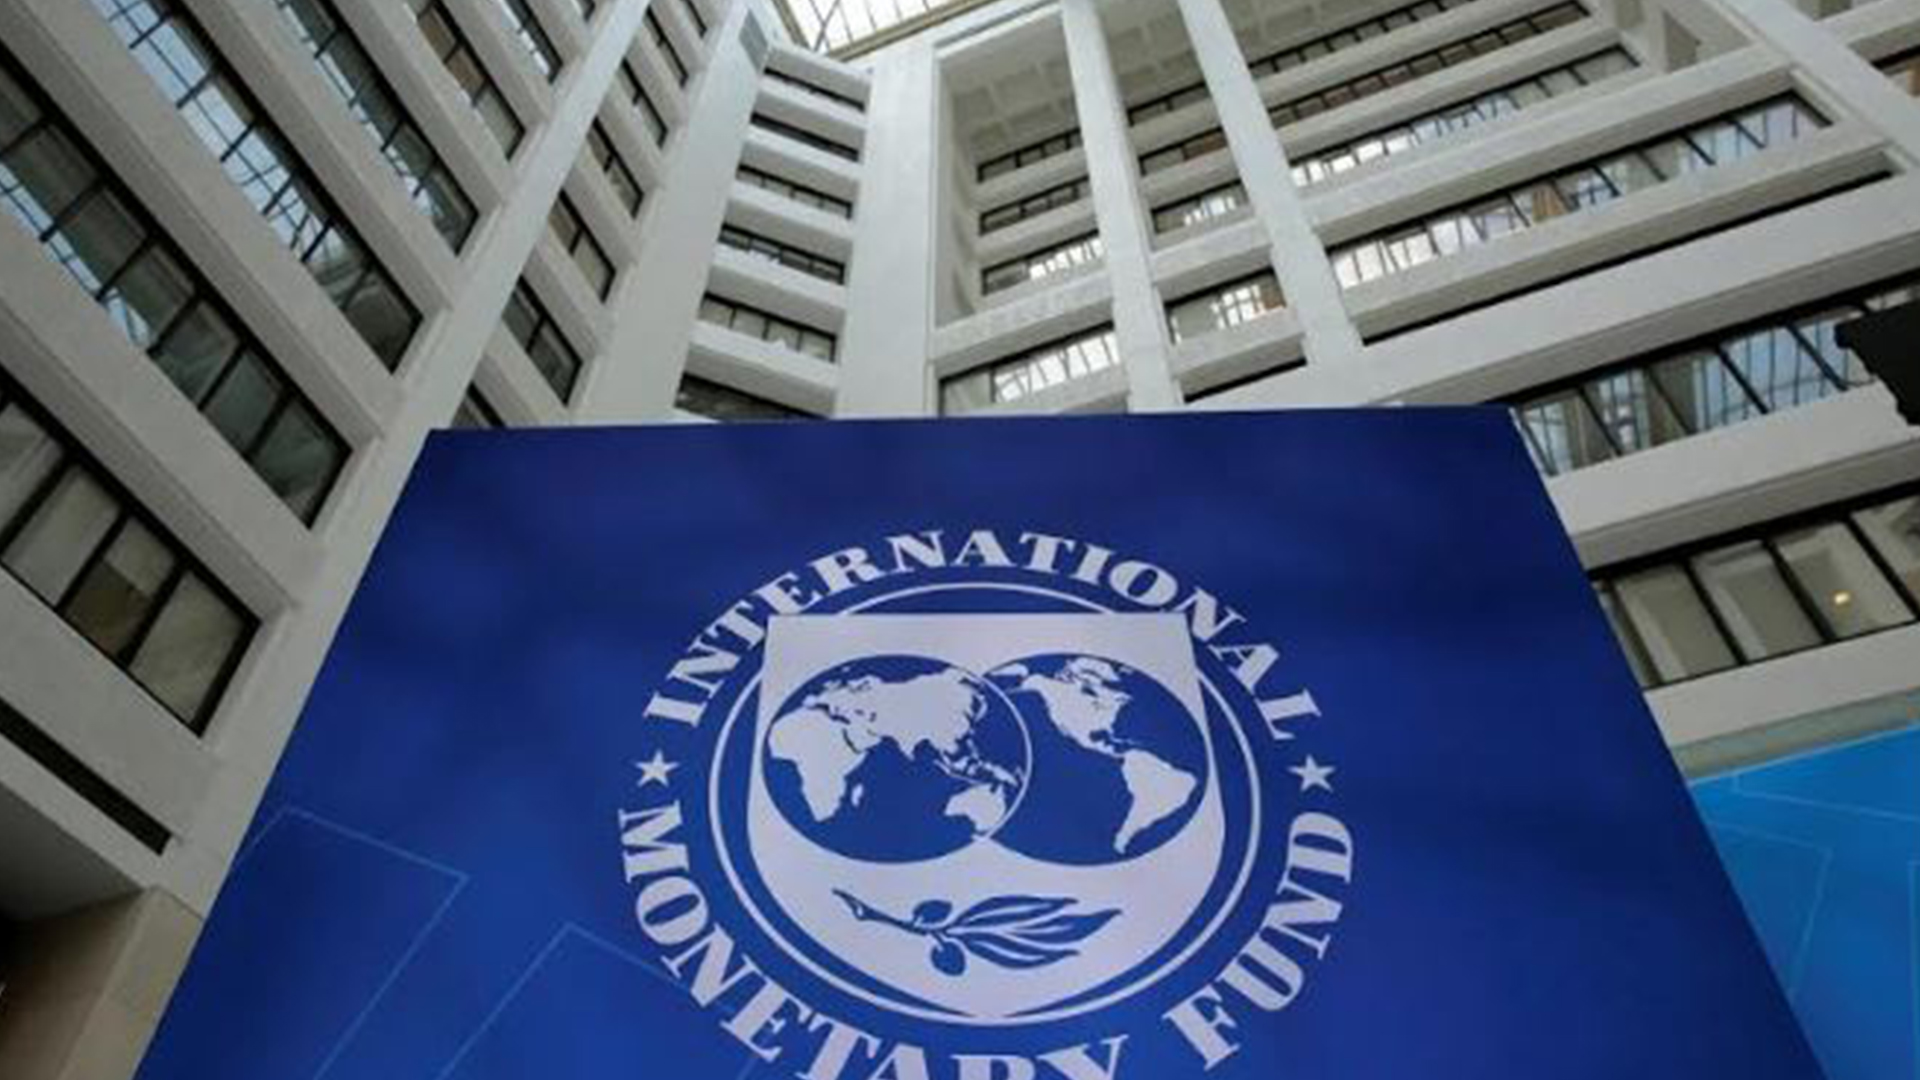 International Monetary Fund projects World GDP to drop 4.4% in 2020, rise 5.2% 2021